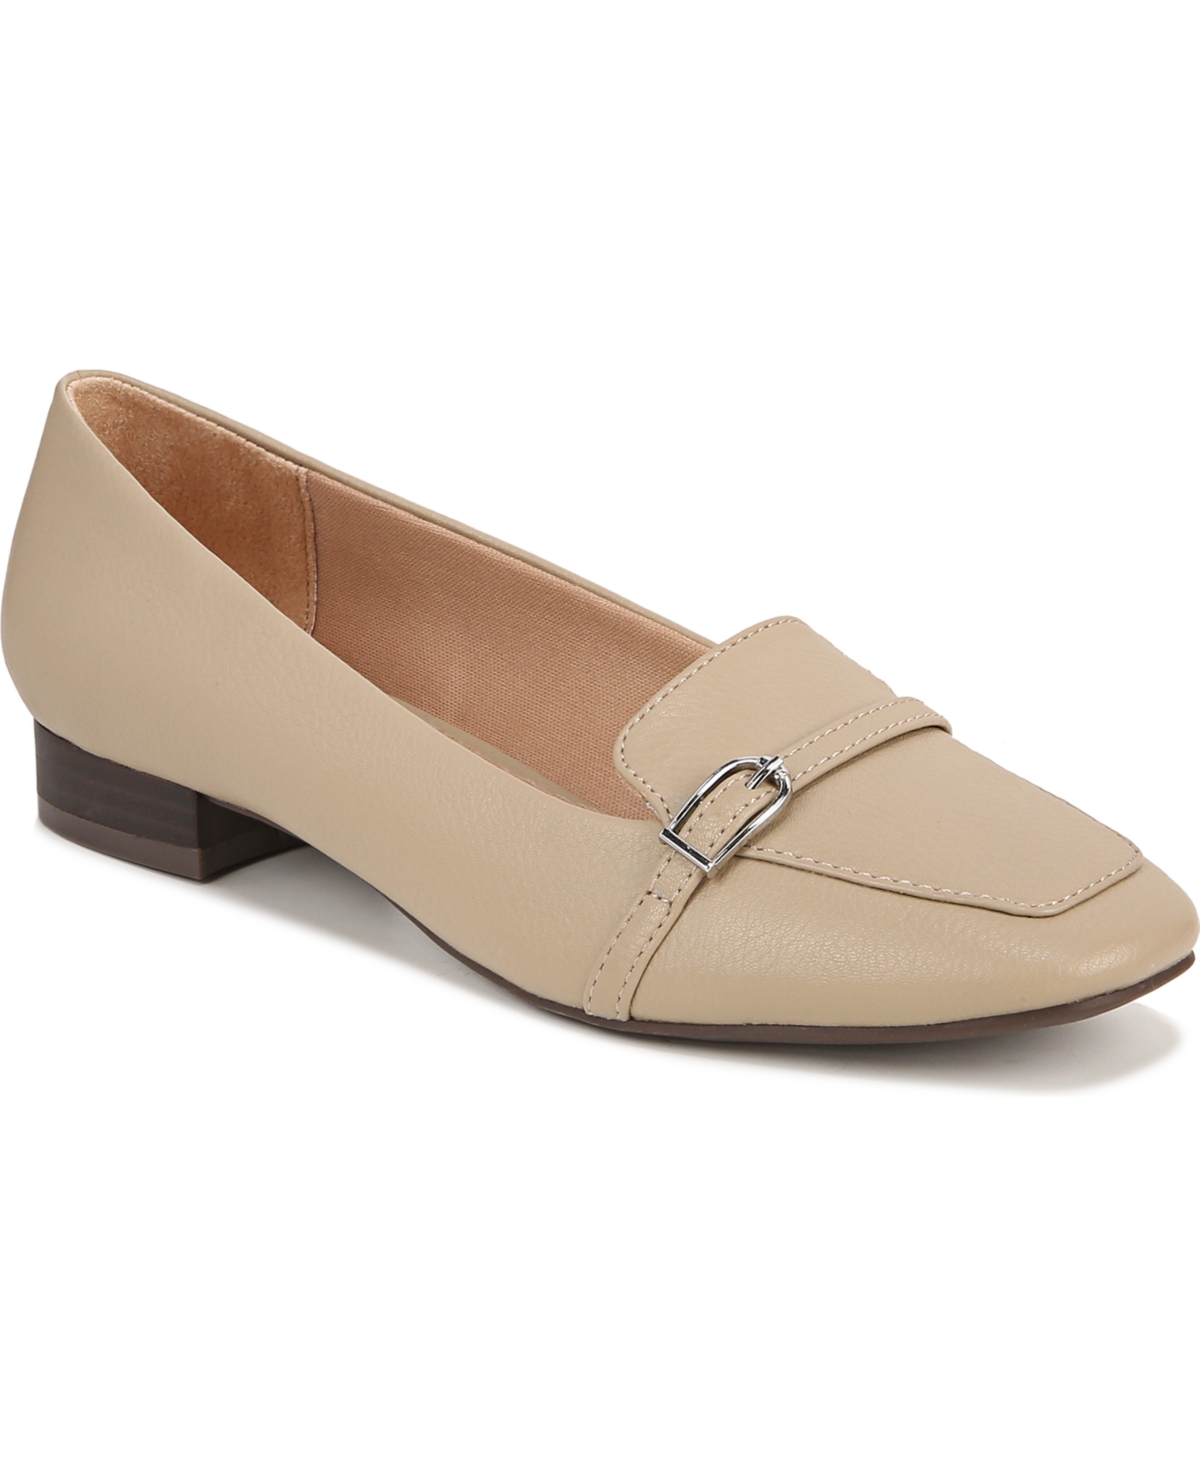 LIFESTRIDE CATALINA SLIP ON LOAFERS